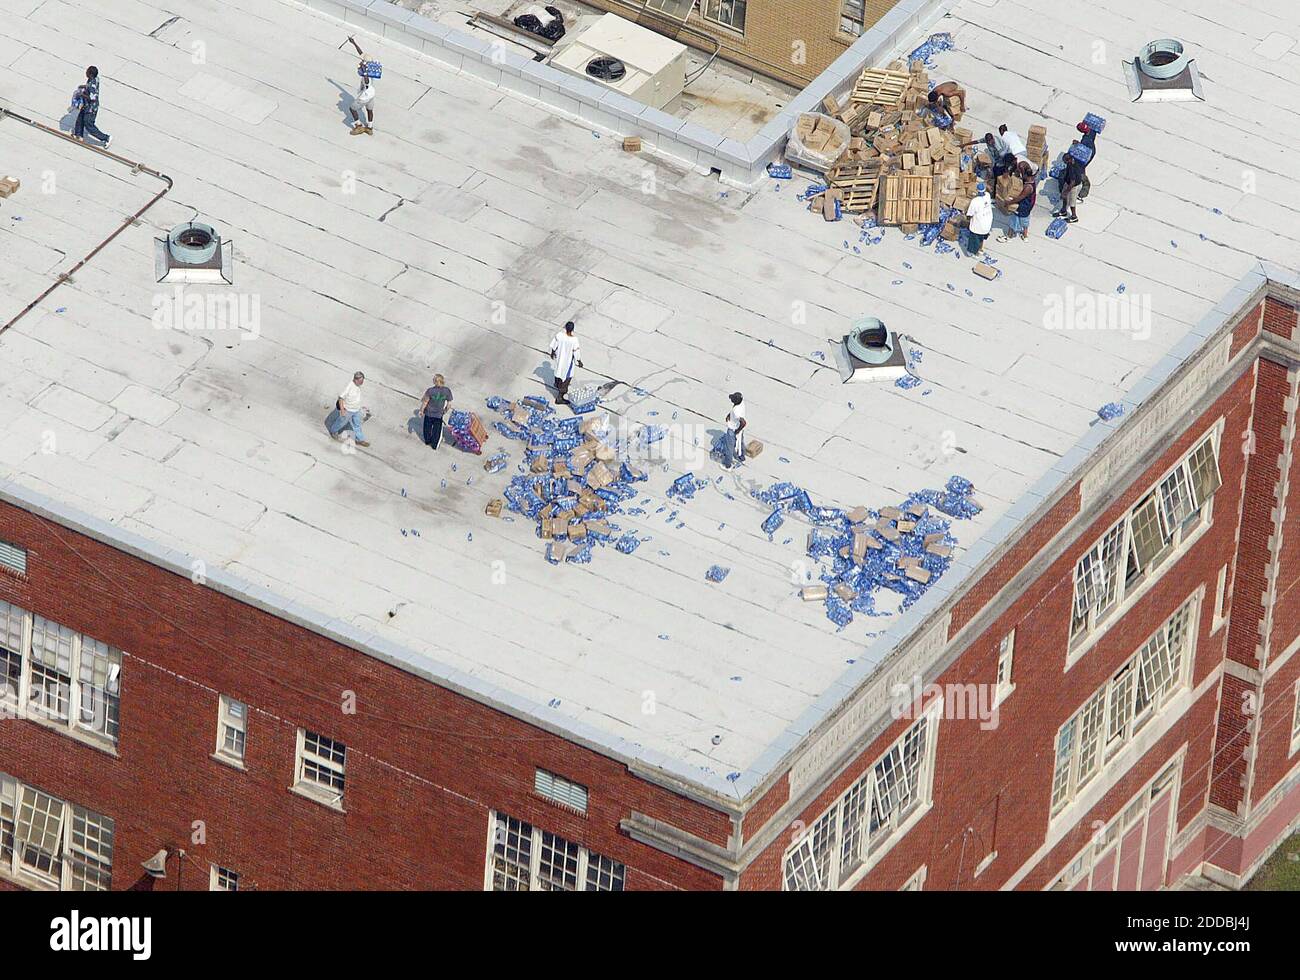 NO FILM, NO VIDEO, NO TV, NO DOCUMENTARY - People sift through bottles of water on the roof of a building in New Orleans, Louisiana, as Hurricane Katrina refugees seek relief Saturday, September 3, 2005. Photo by Nuri Vallbona/Miami Herald/KRT/ABACAPRESS.COM. Stock Photo